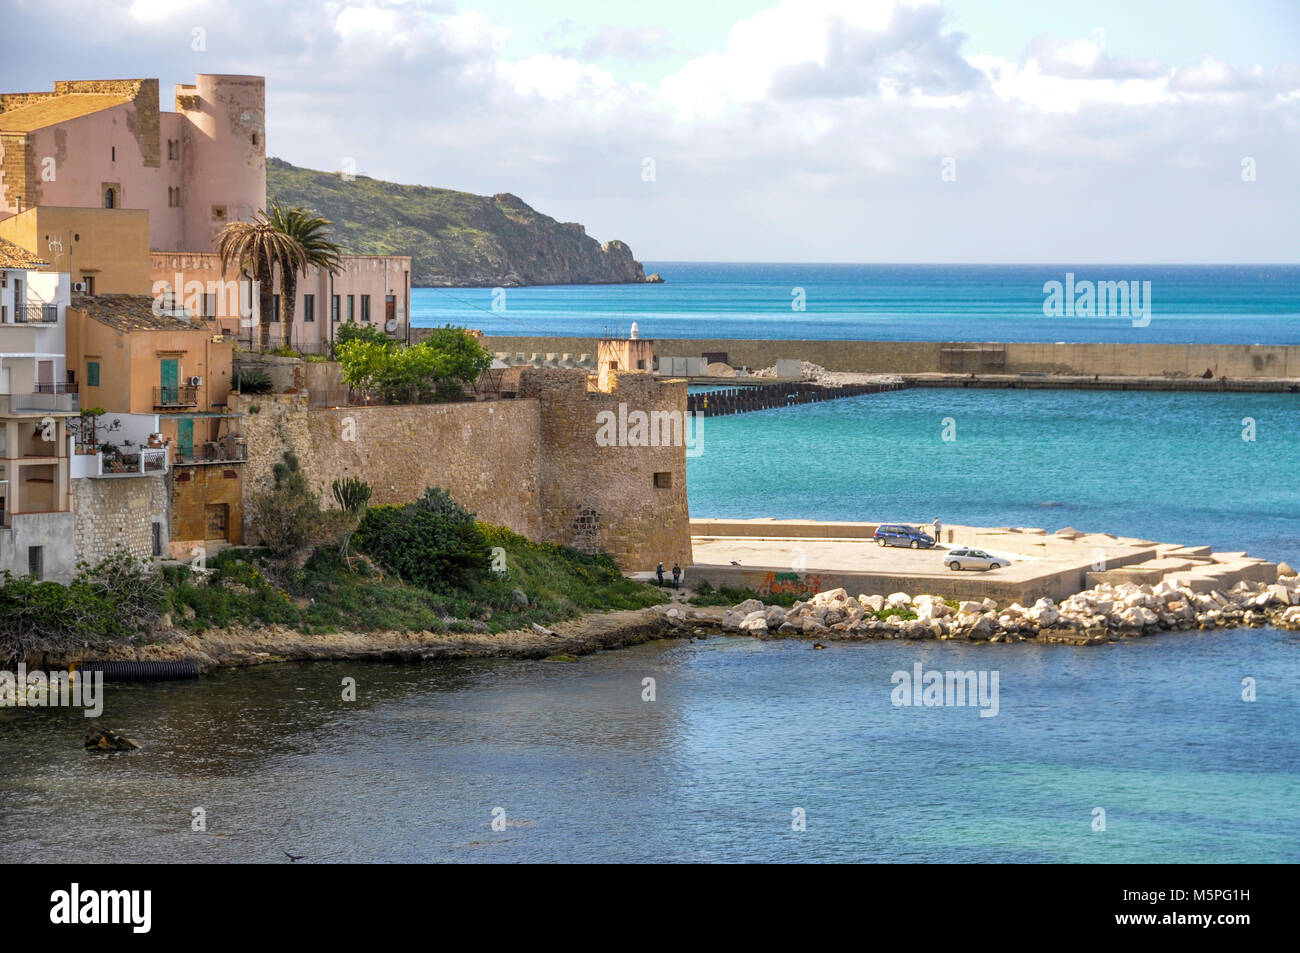 The castello in the  harbour of Castellammare del Golfo for which, the town is named after, Sicily, Italy. Stock Photo